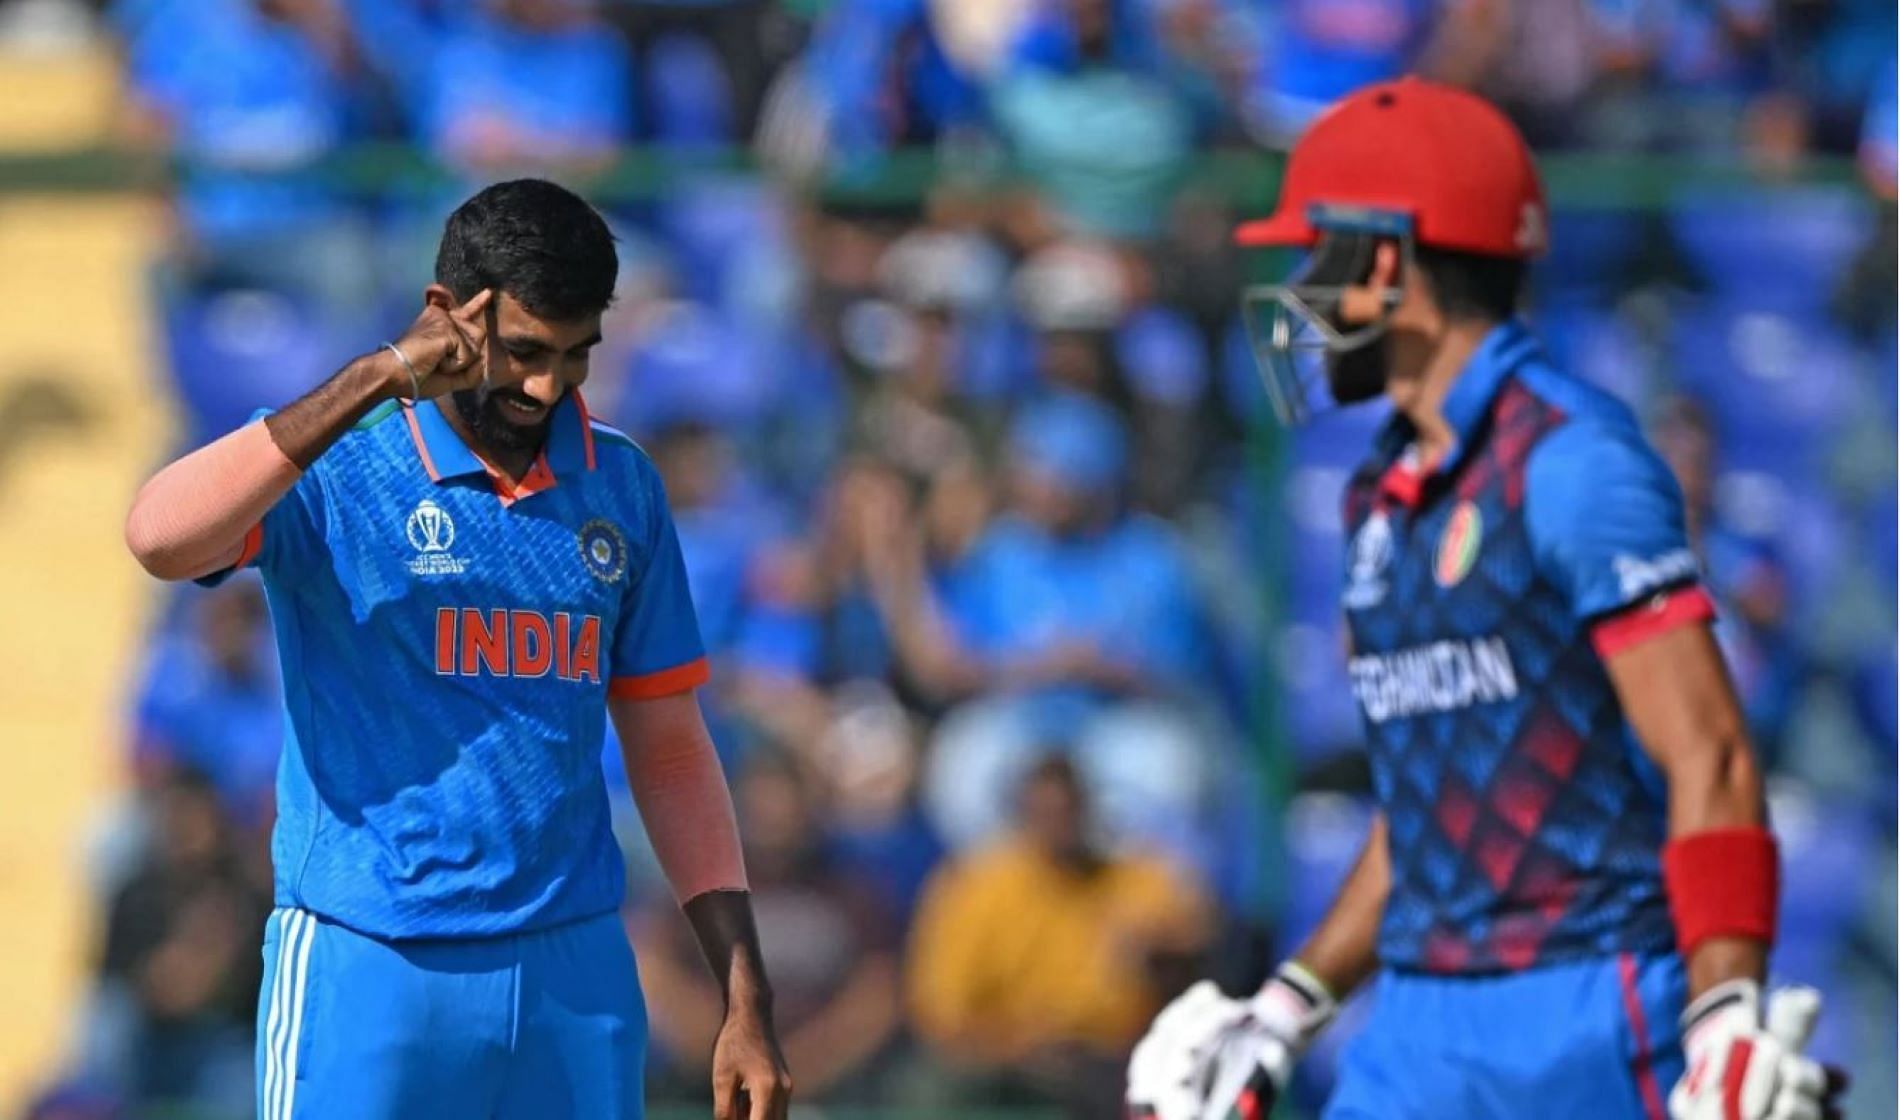 Bumrah continued his spectacular return from injury.